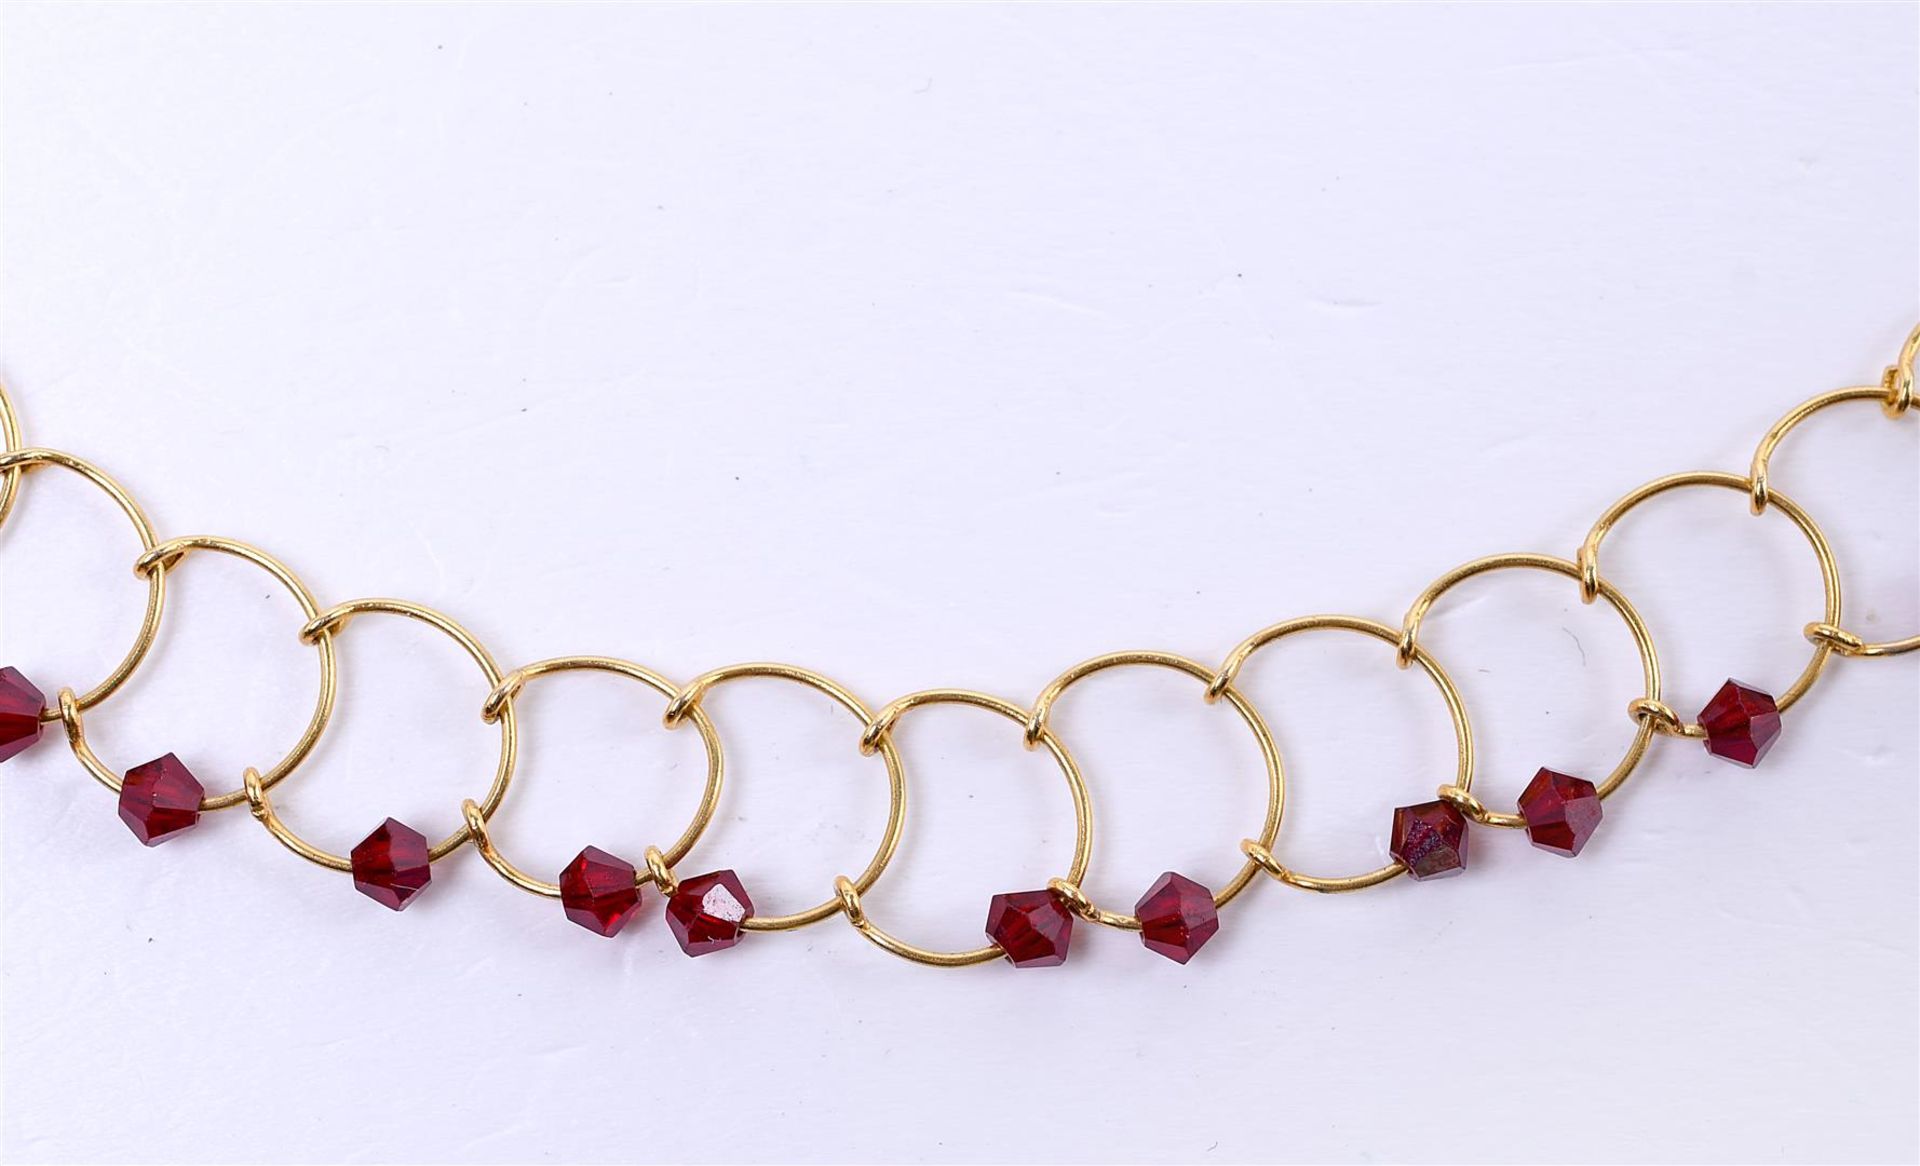 14 kt yellow gold wire necklace set with red crystal stones. Necklace length 41cm - Bild 3 aus 6